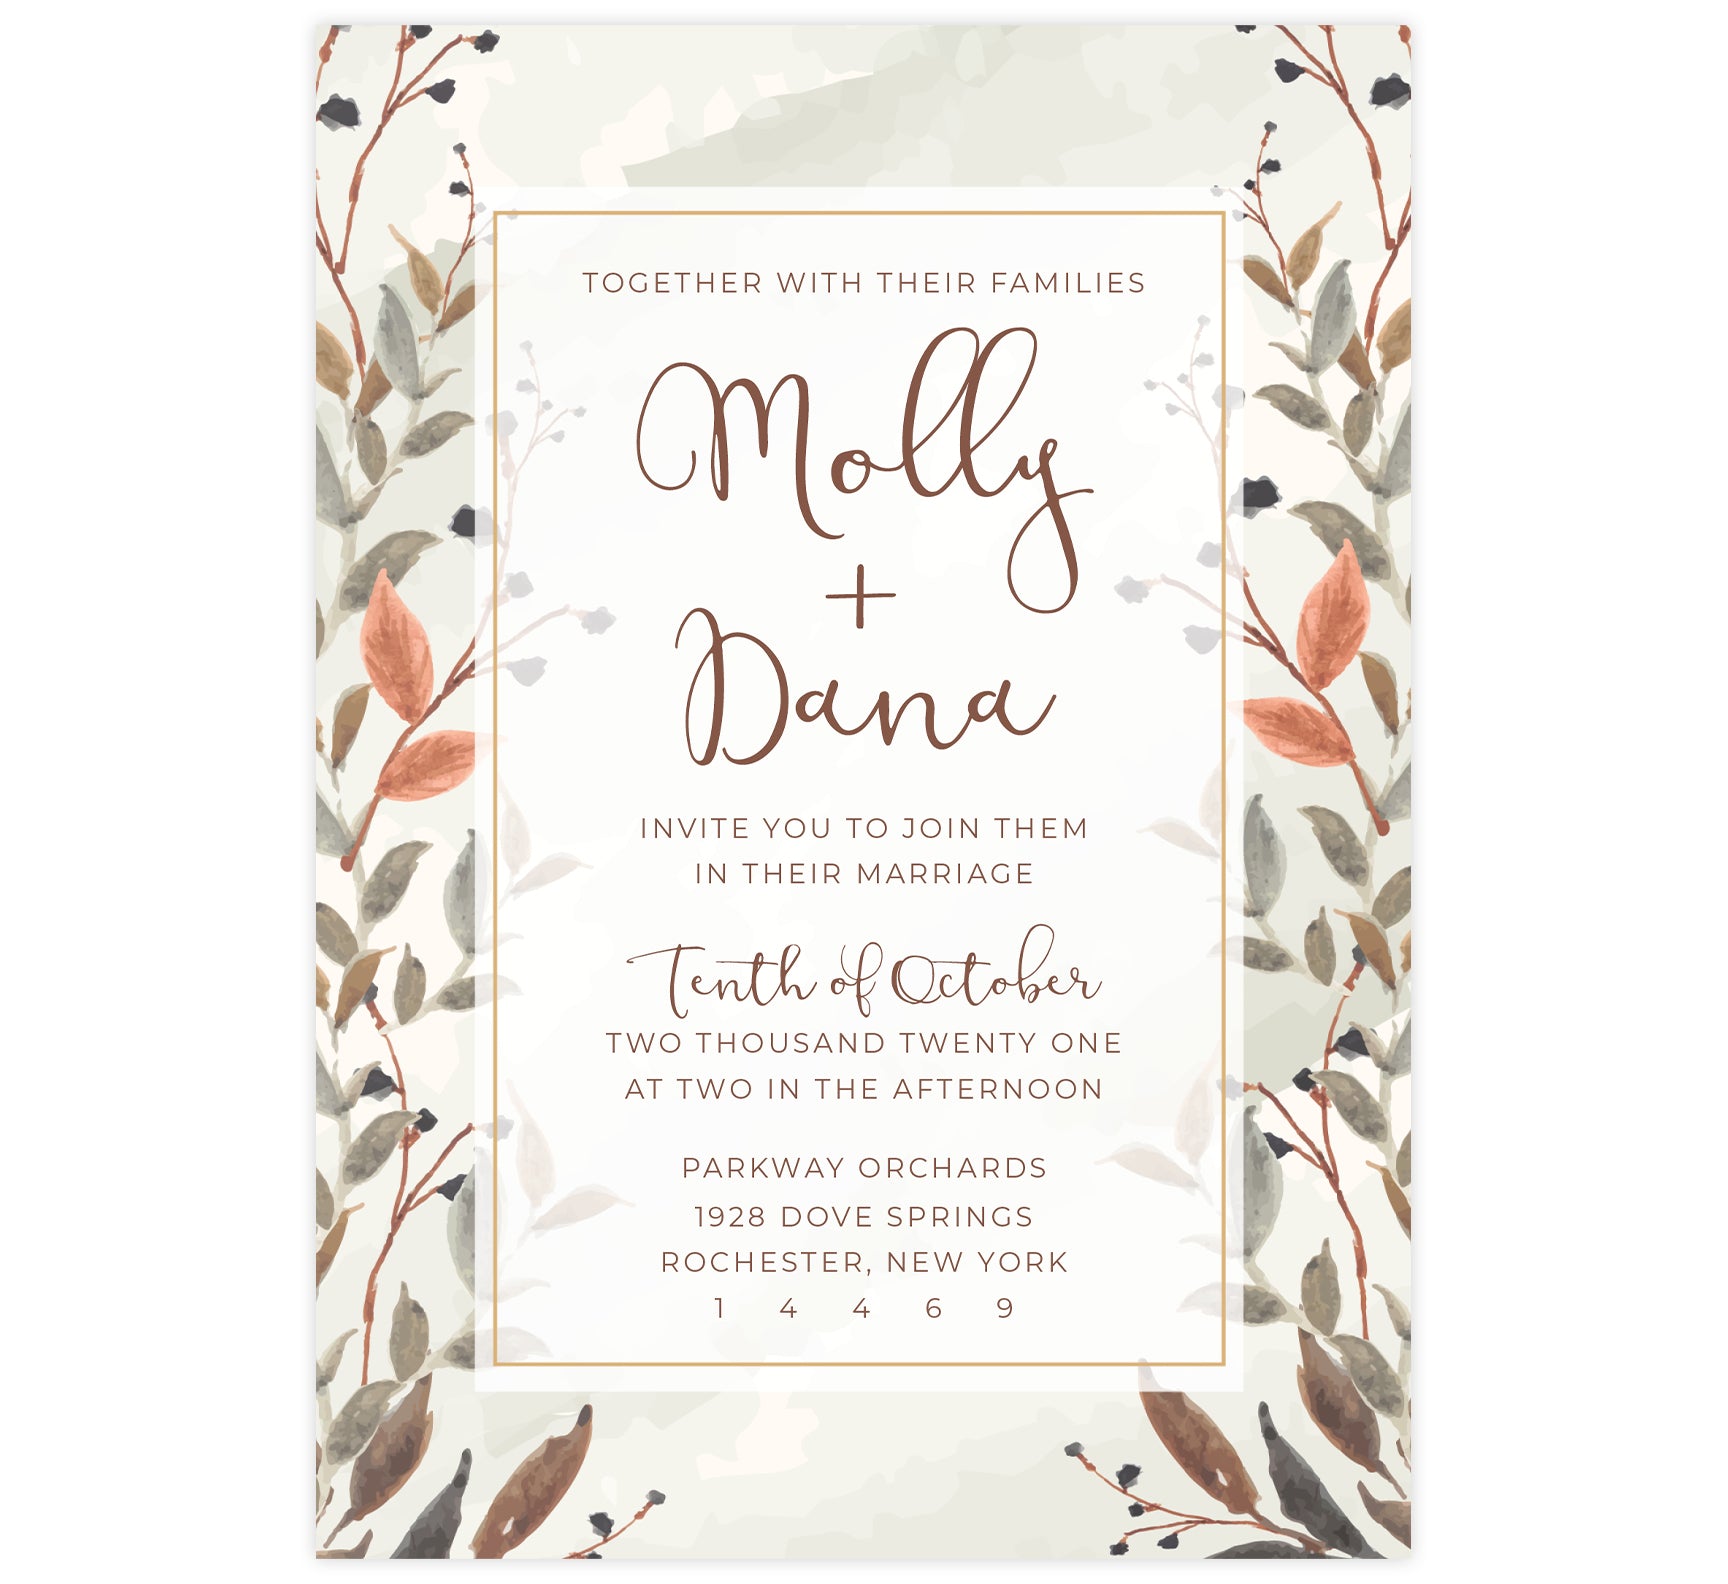 Fantasy Love wedding invitation card; watercolor neutral colored background with brown text